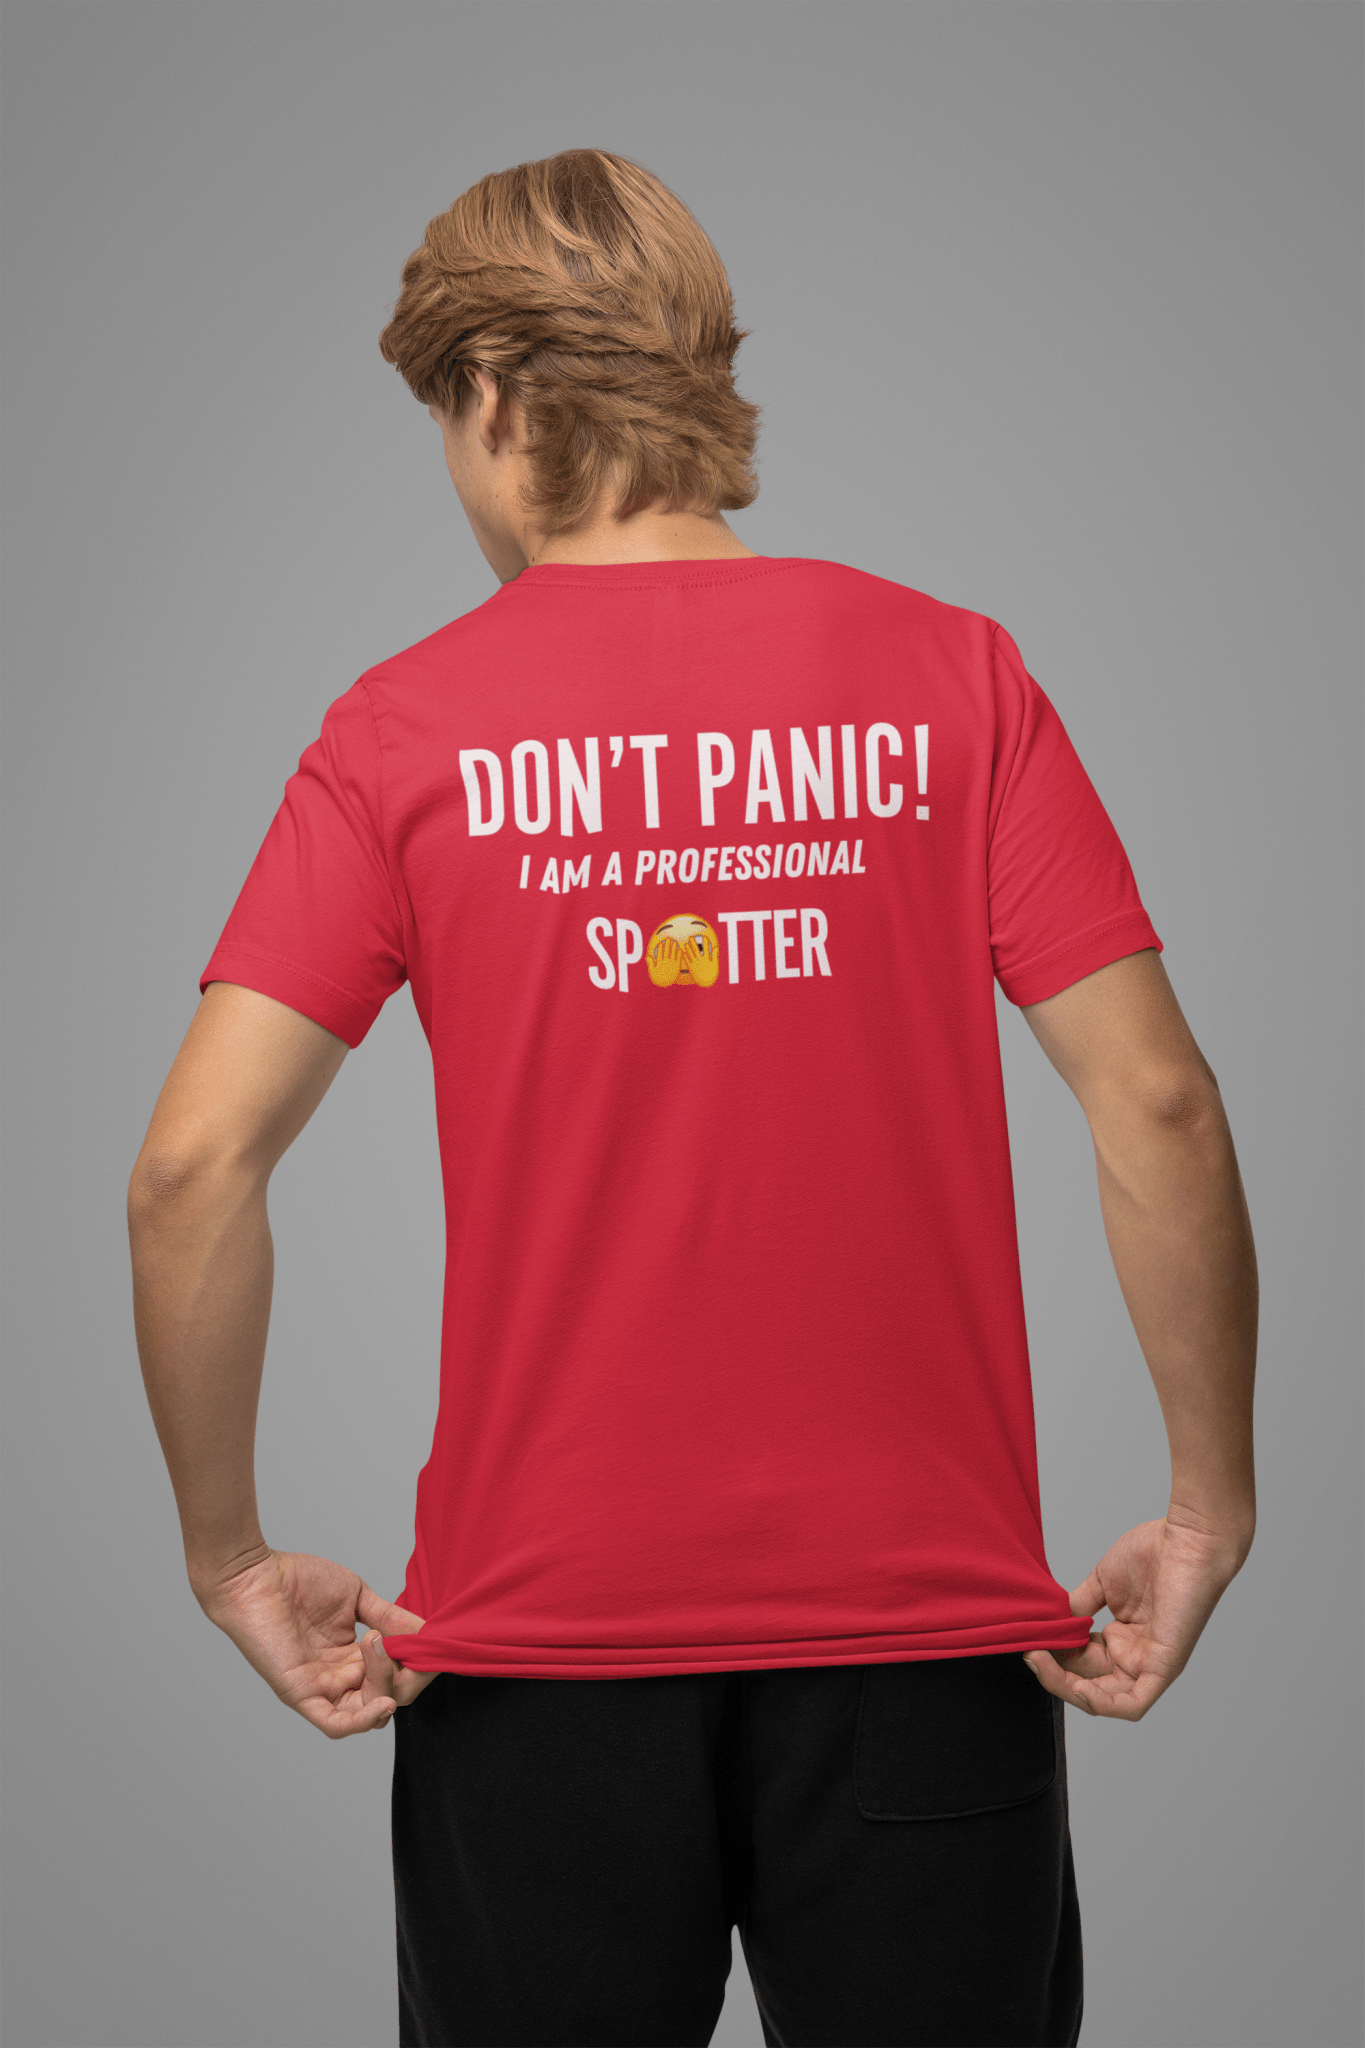 Don't Panic! I Am A Professional Spotter Tee Shirt - Goats Trail Off-Road Apparel Company